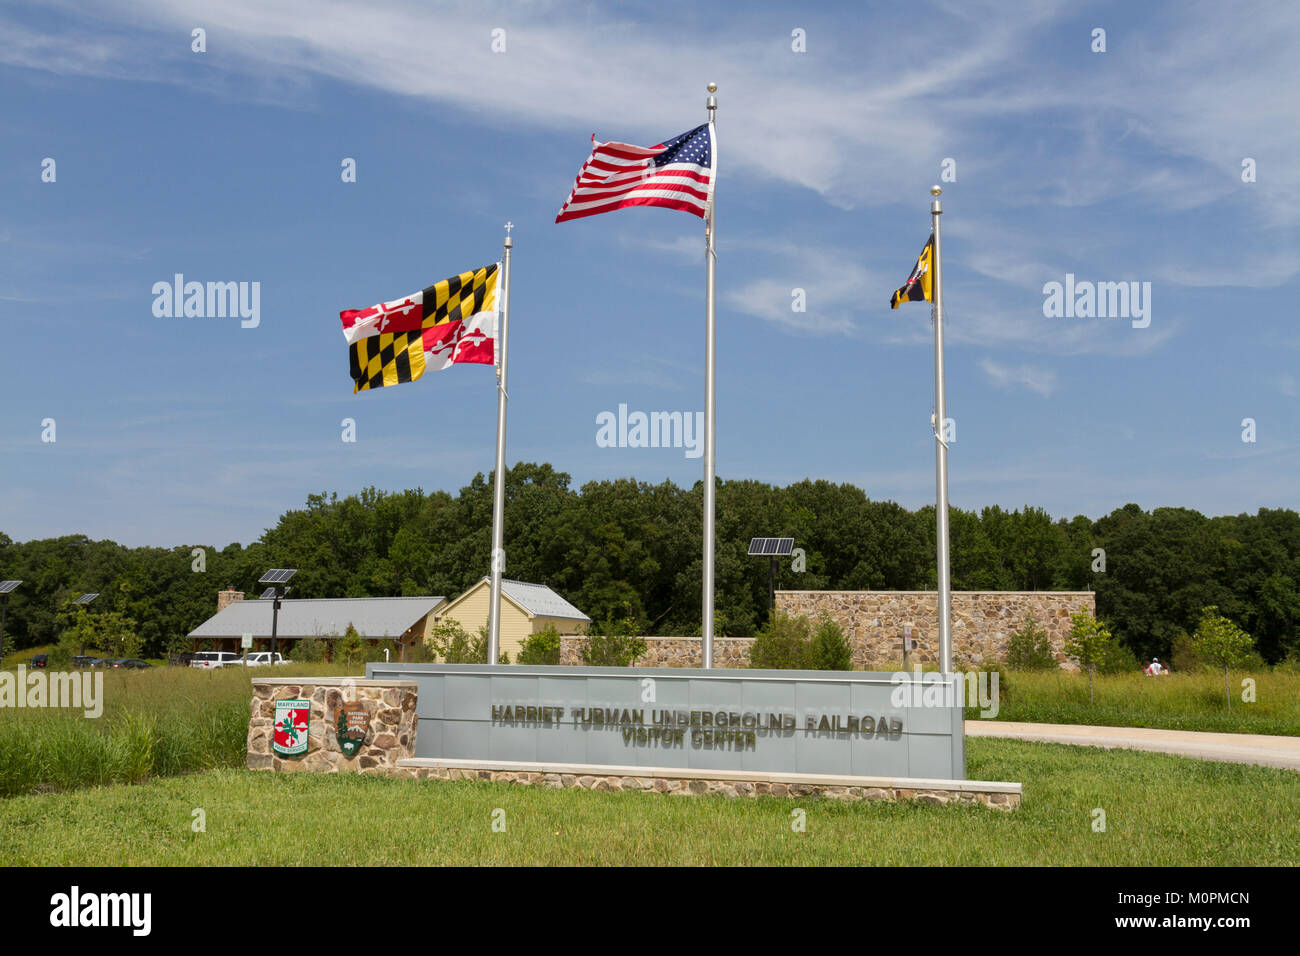 Flags outside the entrance to the Harriet Tubman Underground Railroad Visitor Center, Church Creek, Maryland, United States. Stock Photo